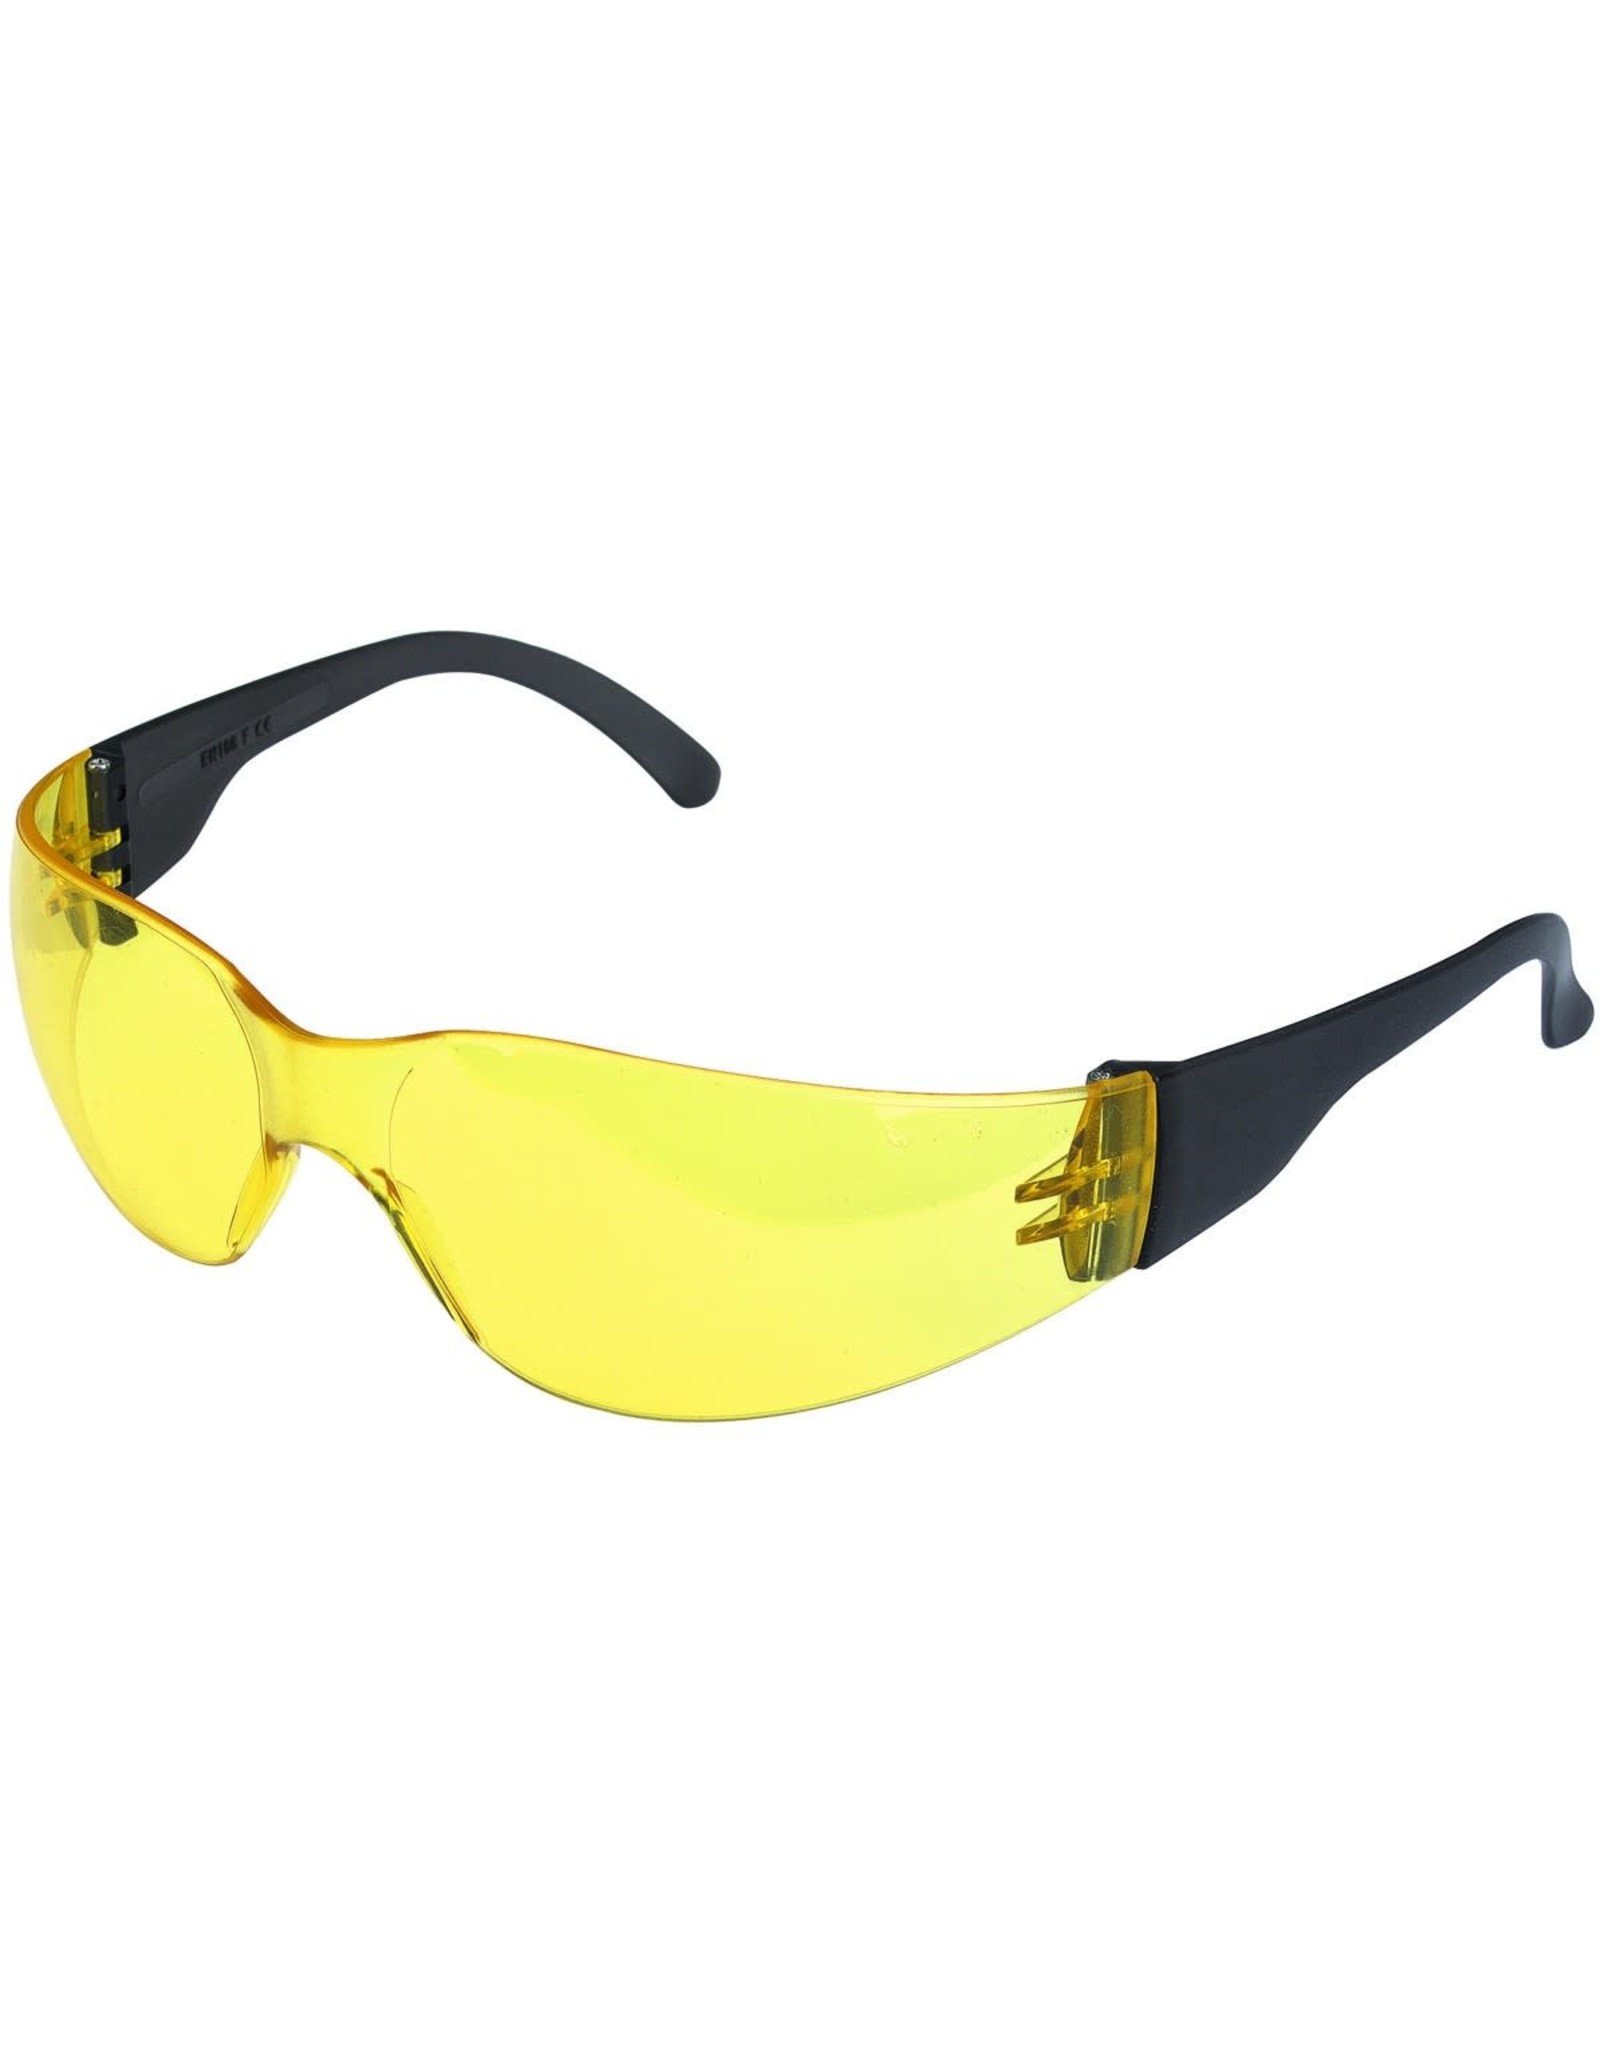 UV Safety Glasses with Yellow Lenses